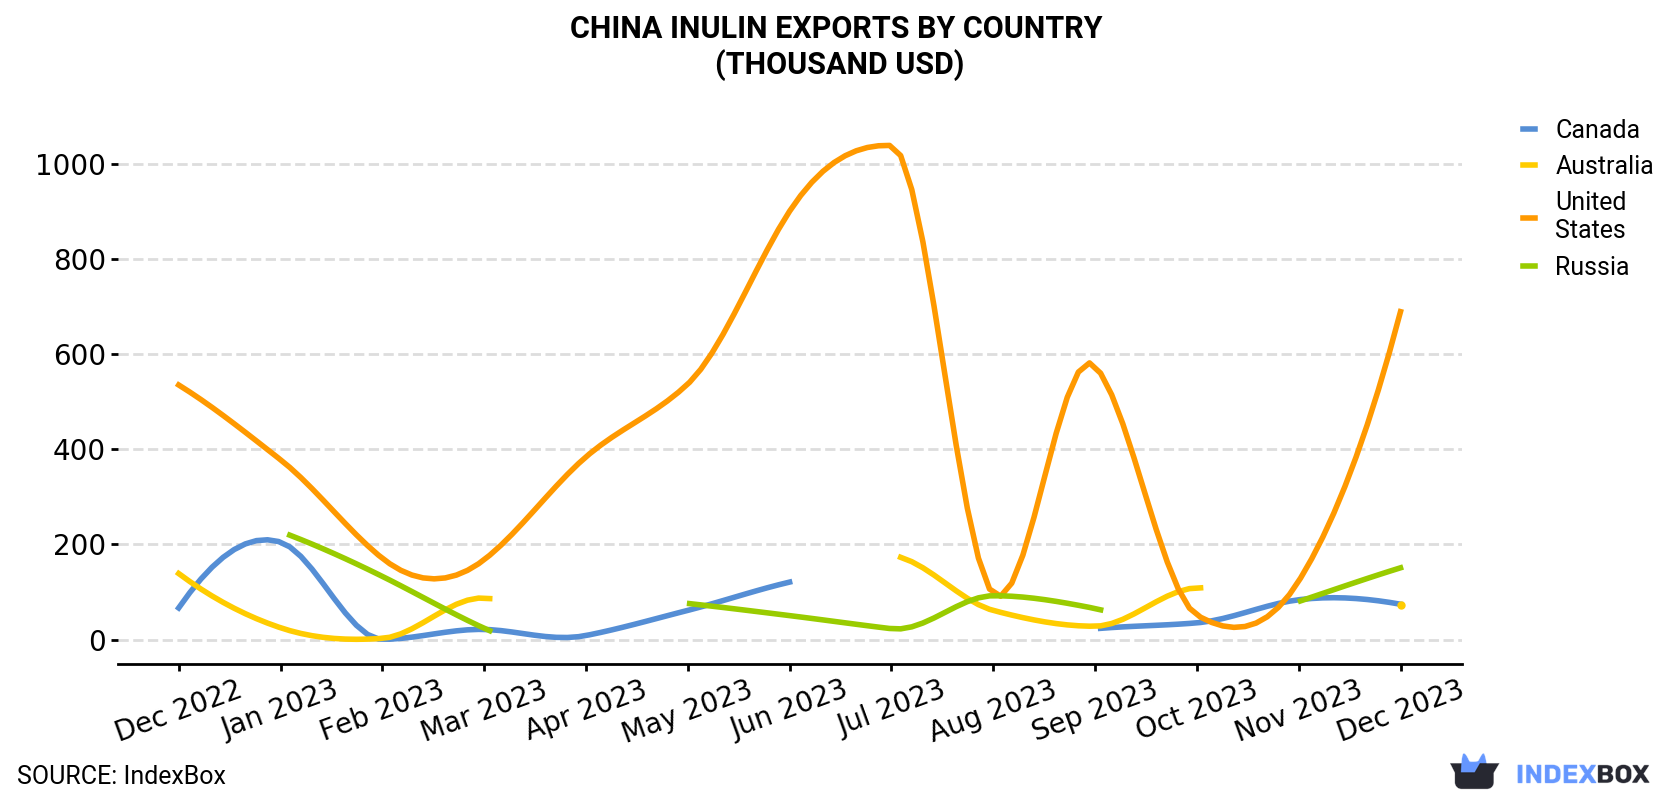 China Inulin Exports By Country (Thousand USD)